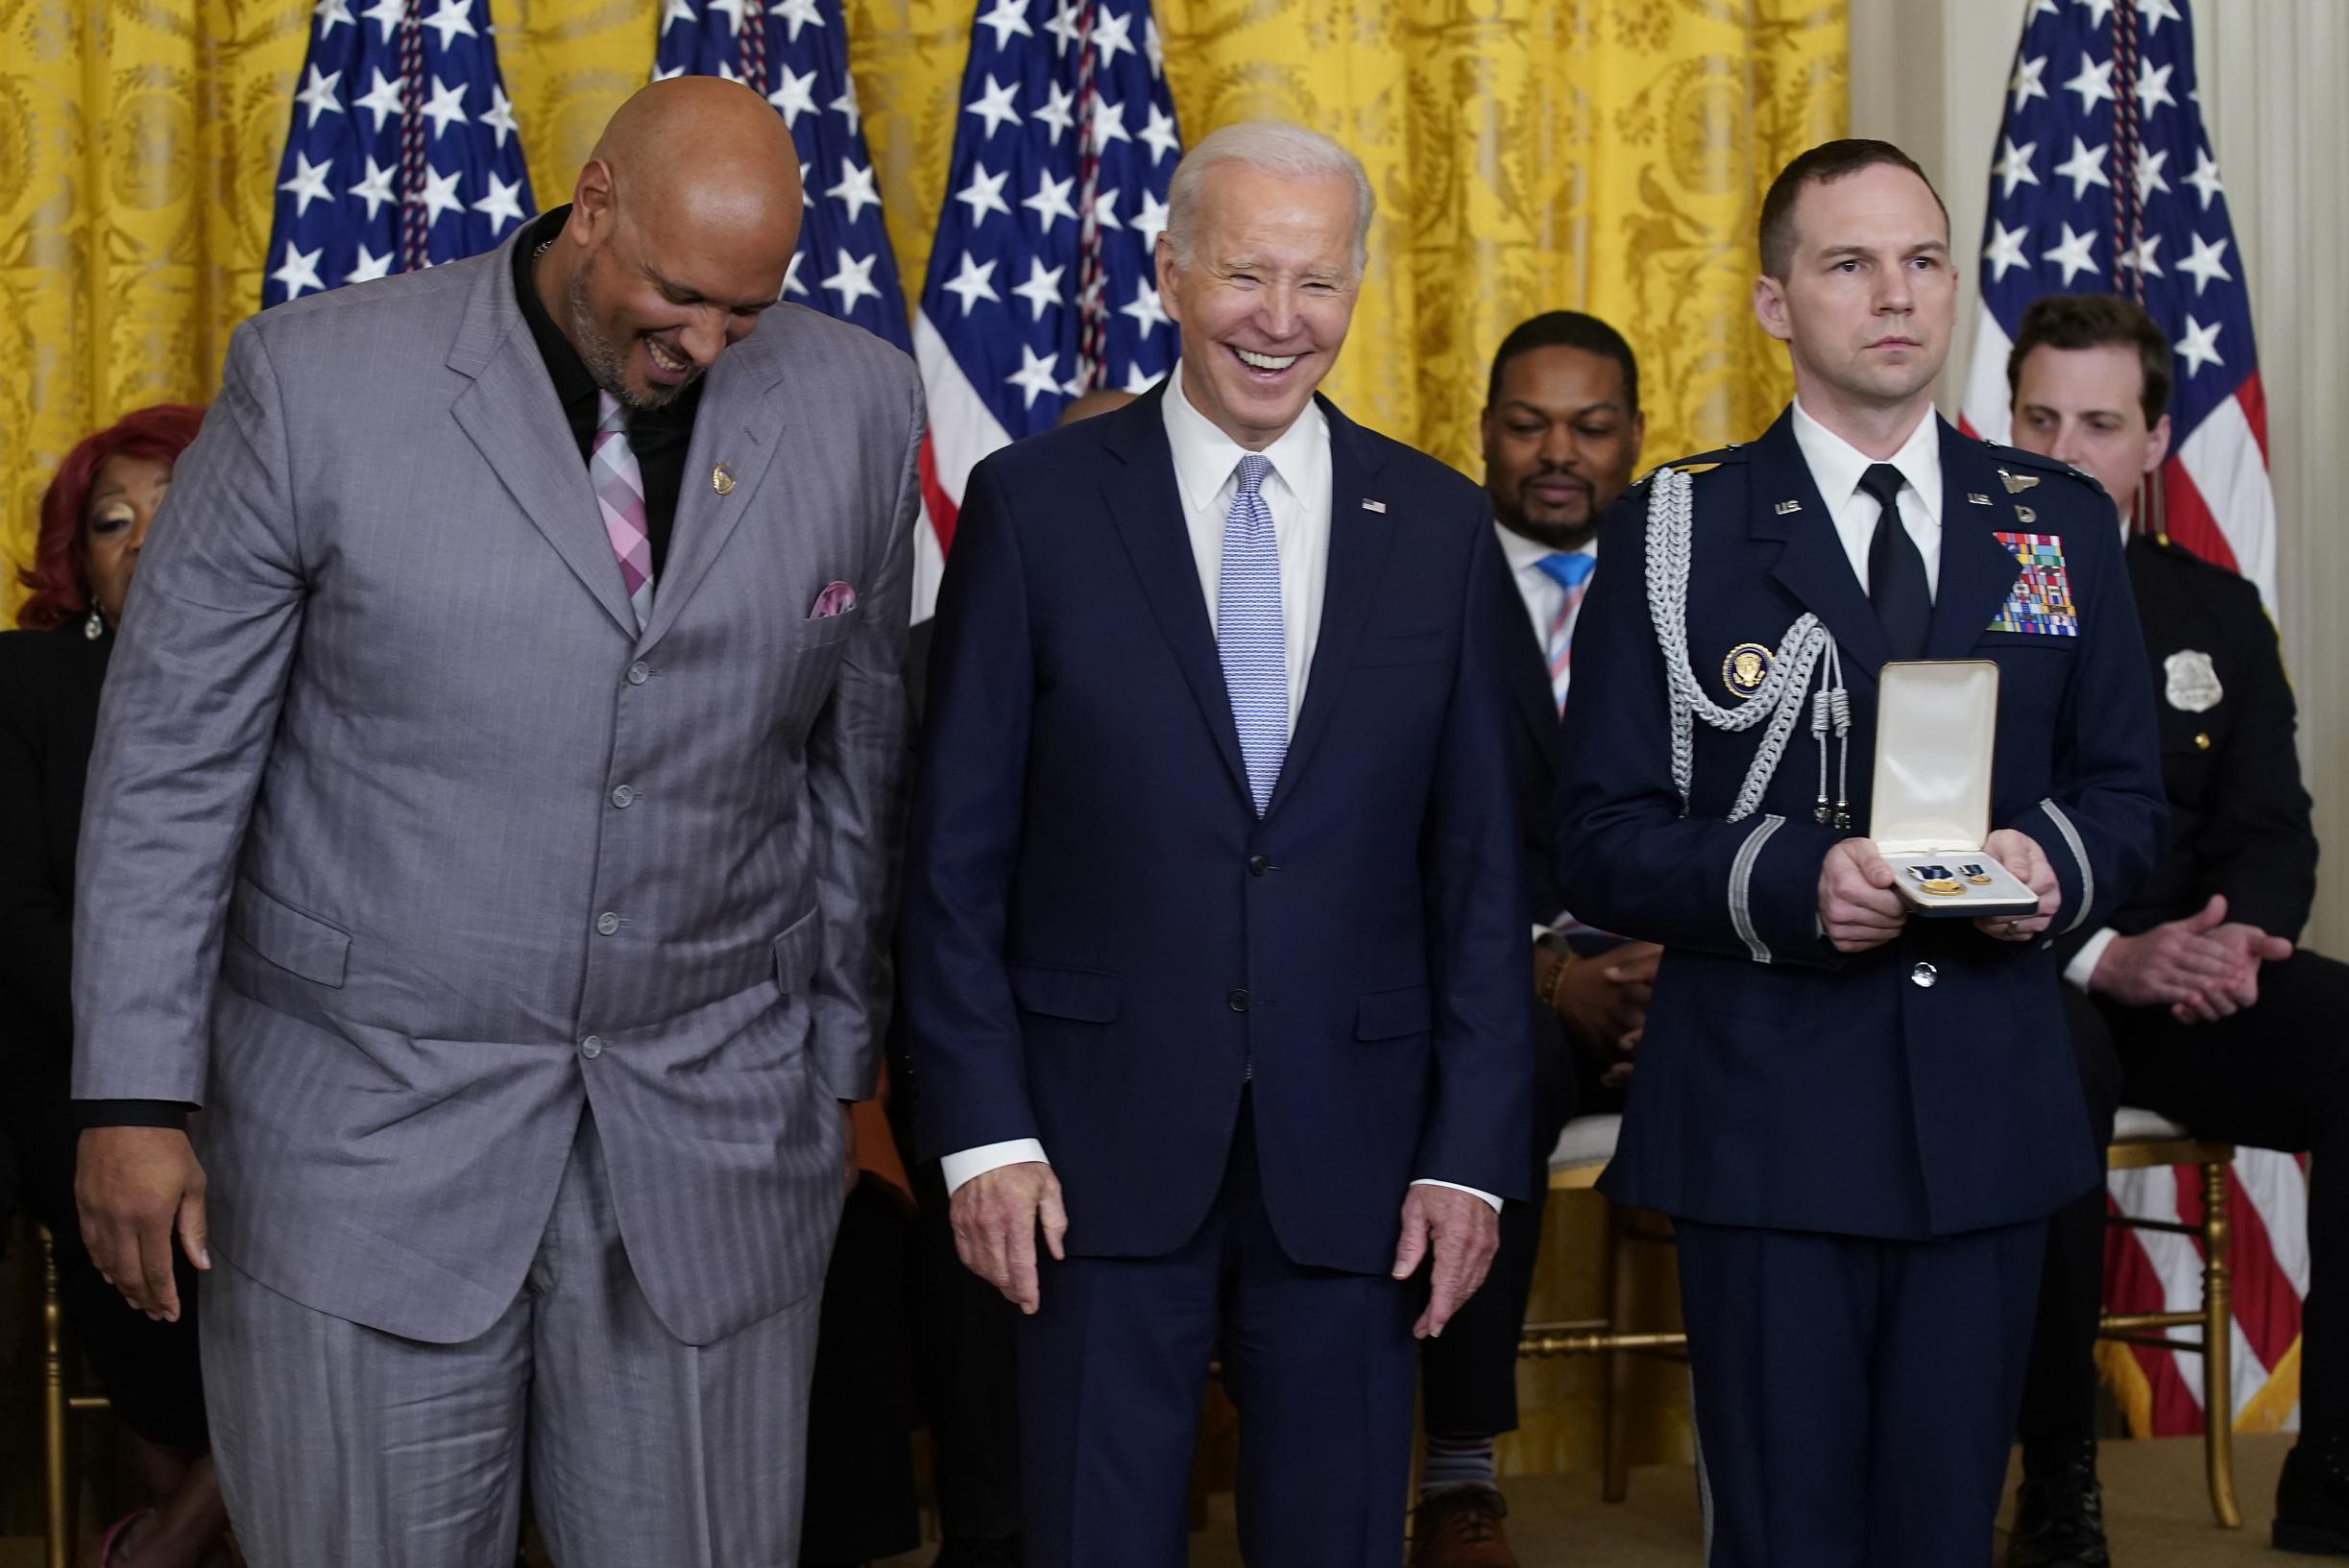 Biden awards police officers two years after Capitol attack: “Our democracy is under attack”